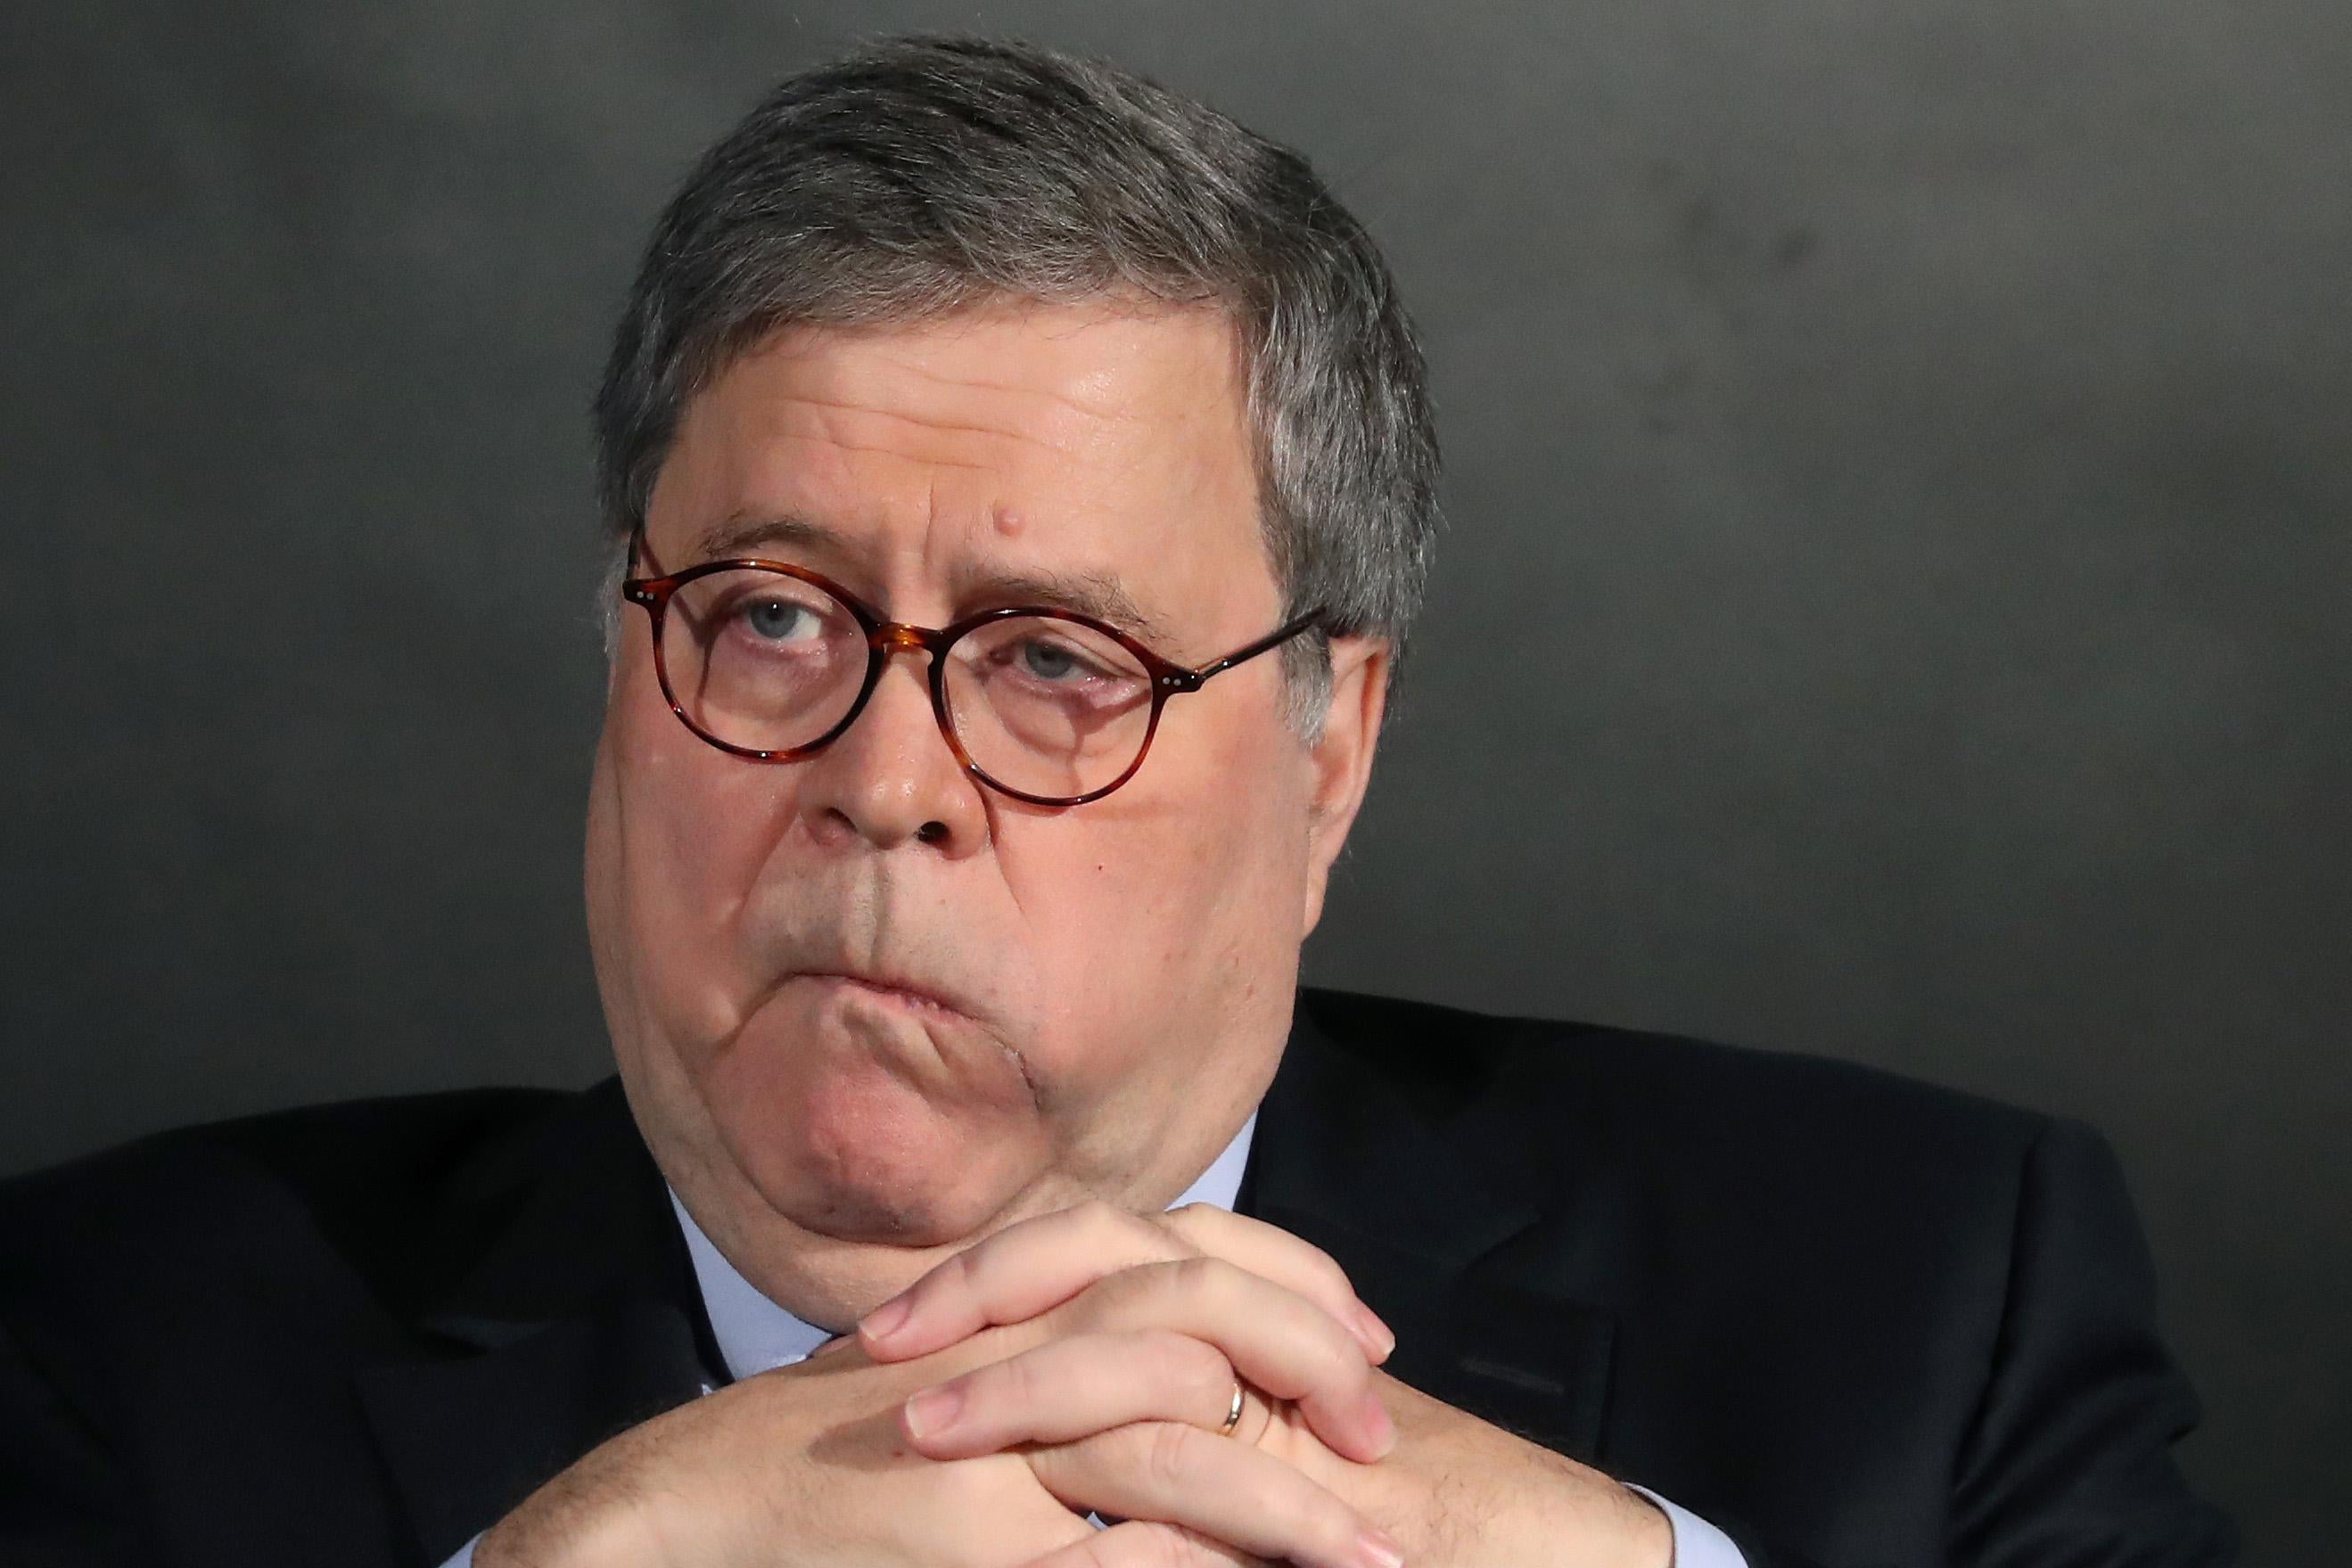 William Barr pursing his lips and holding his hands together in a way that makes him look particularly sinister.